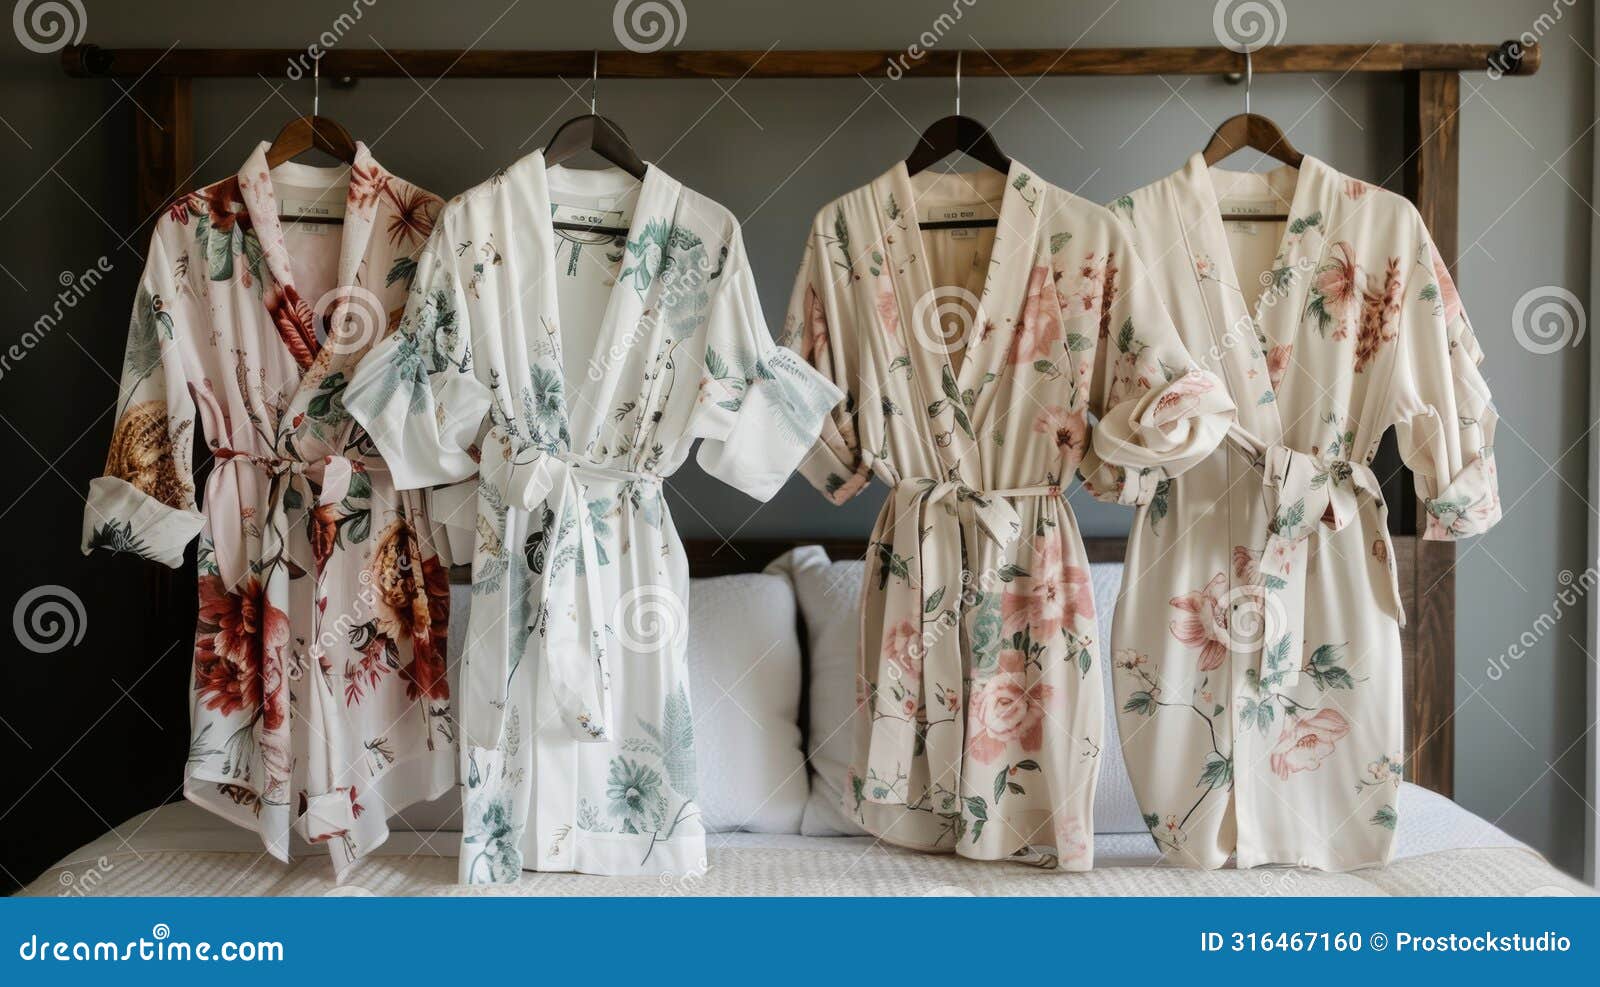 floral robes hanging in bedroom setting